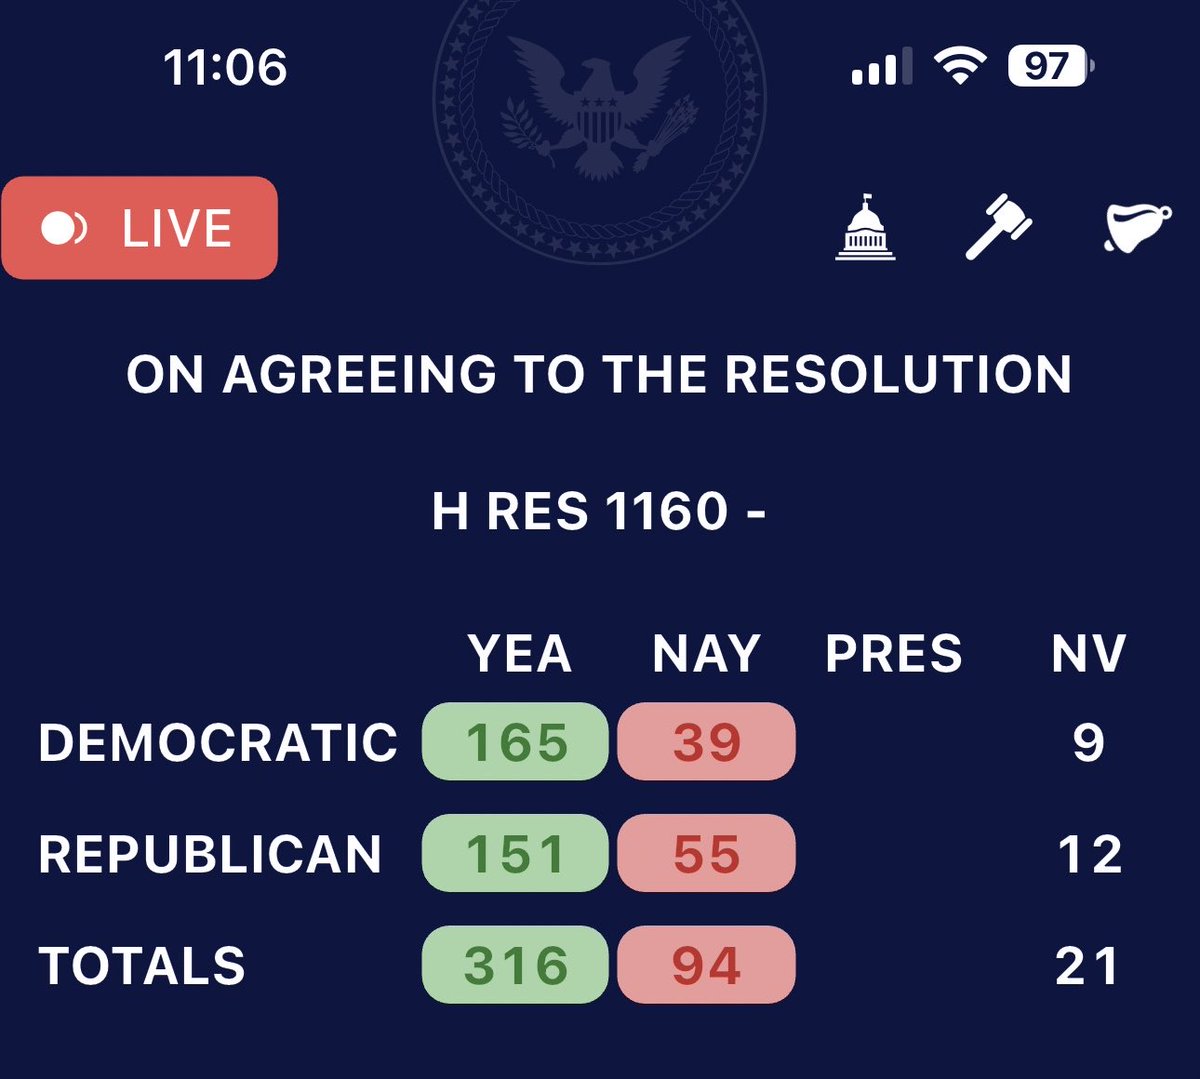 What a beautiful sight! The exhausted majority of center-right & center-left members of Congress placing principles over politics and Democrats willing to support a Republican Speaker. A rare and meaningful win for America, our Congress, and our system of governance.